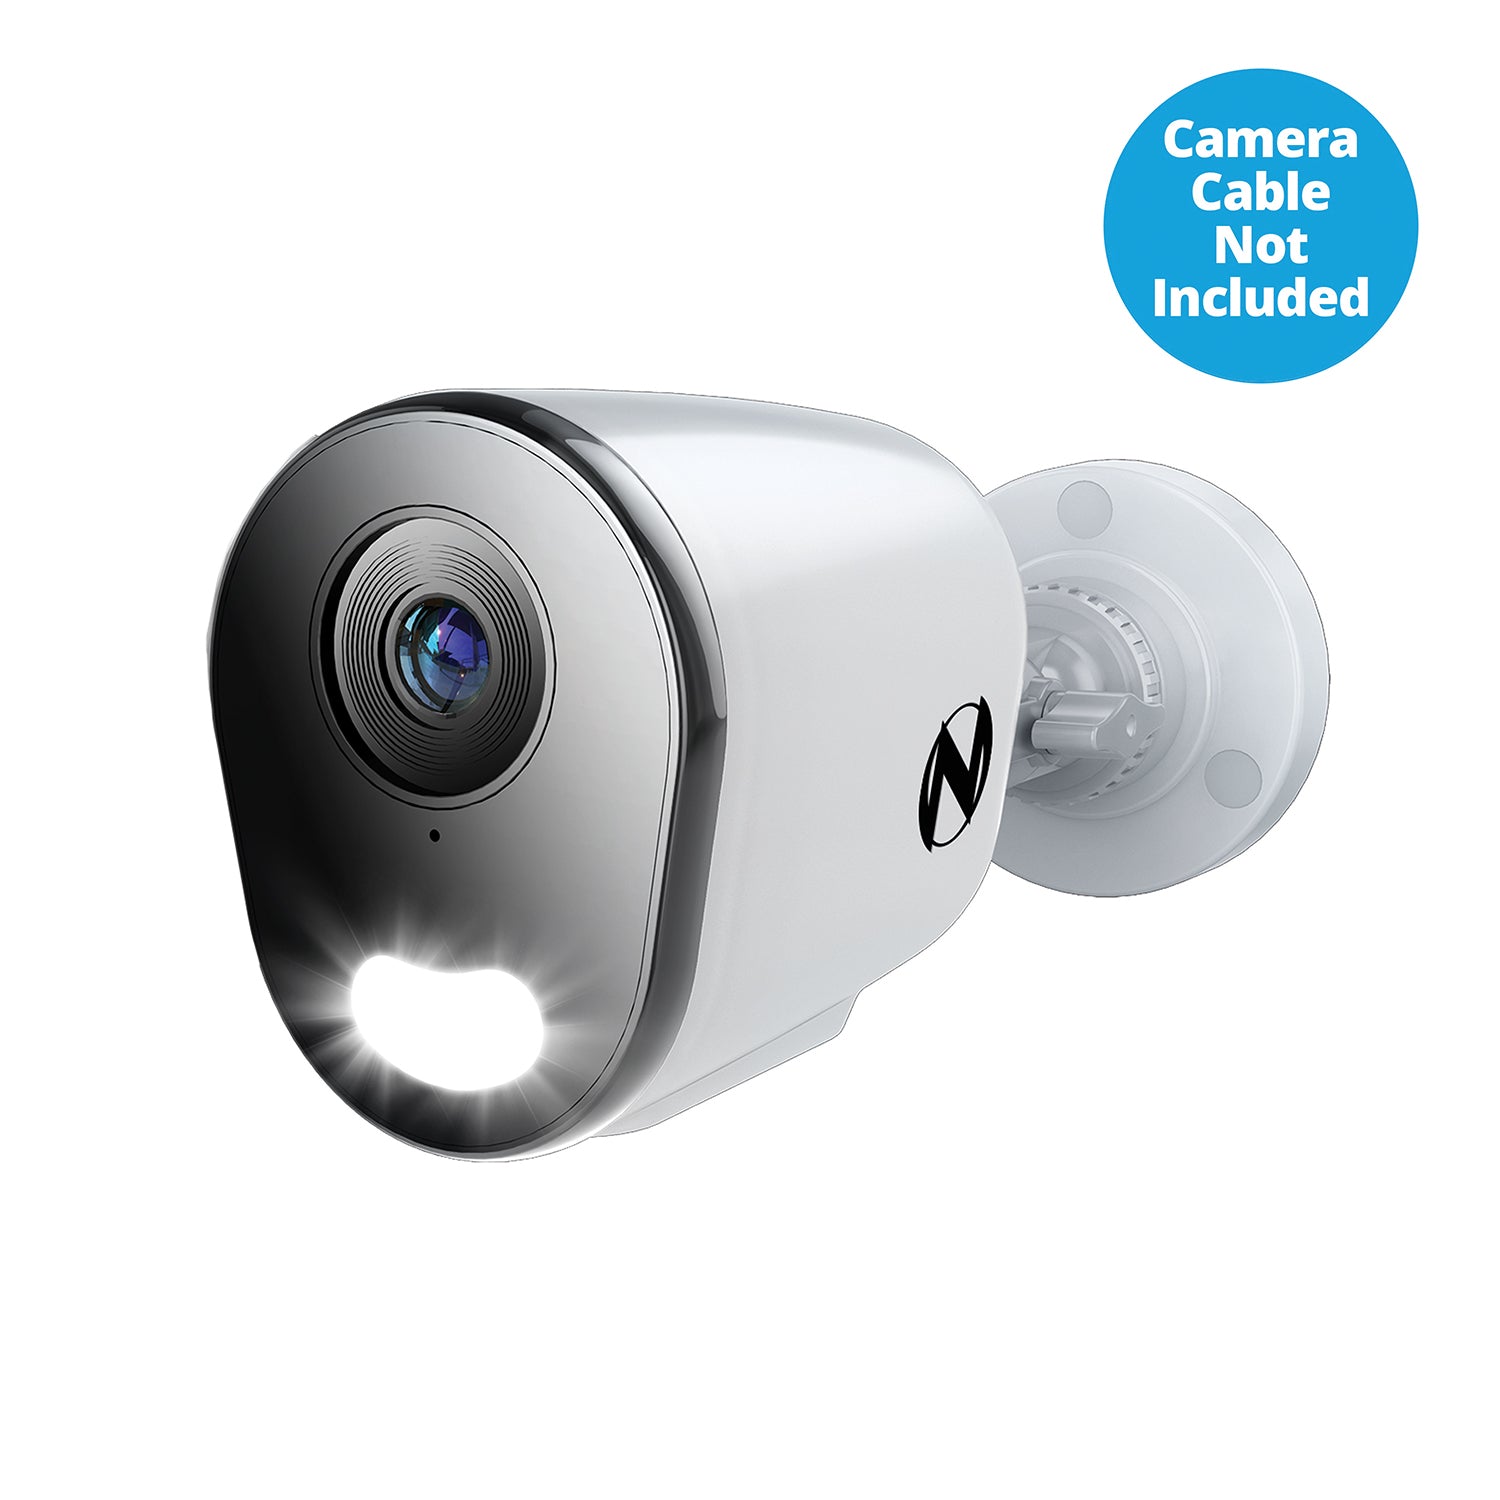 spotlight security camera with cable not included sign